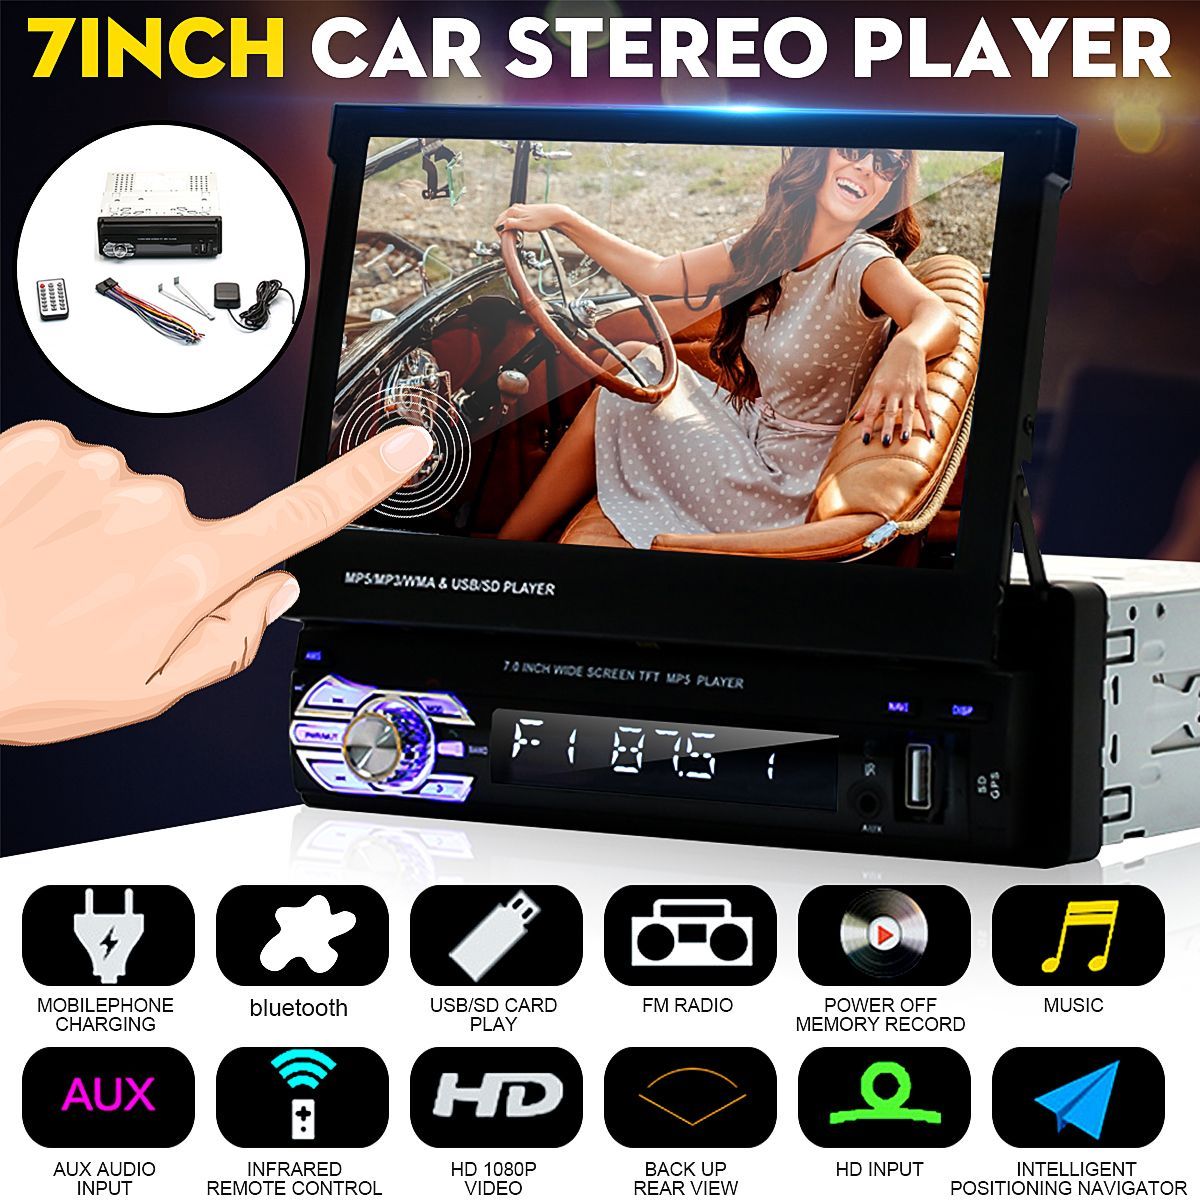 9601G-7-Inch-1Din-for-Wince-Car-Radio-Stereo-MP5-Player-GPS-FM-WiFi-USB-DVR-With-4LEDs-Rearview-Came-1605101